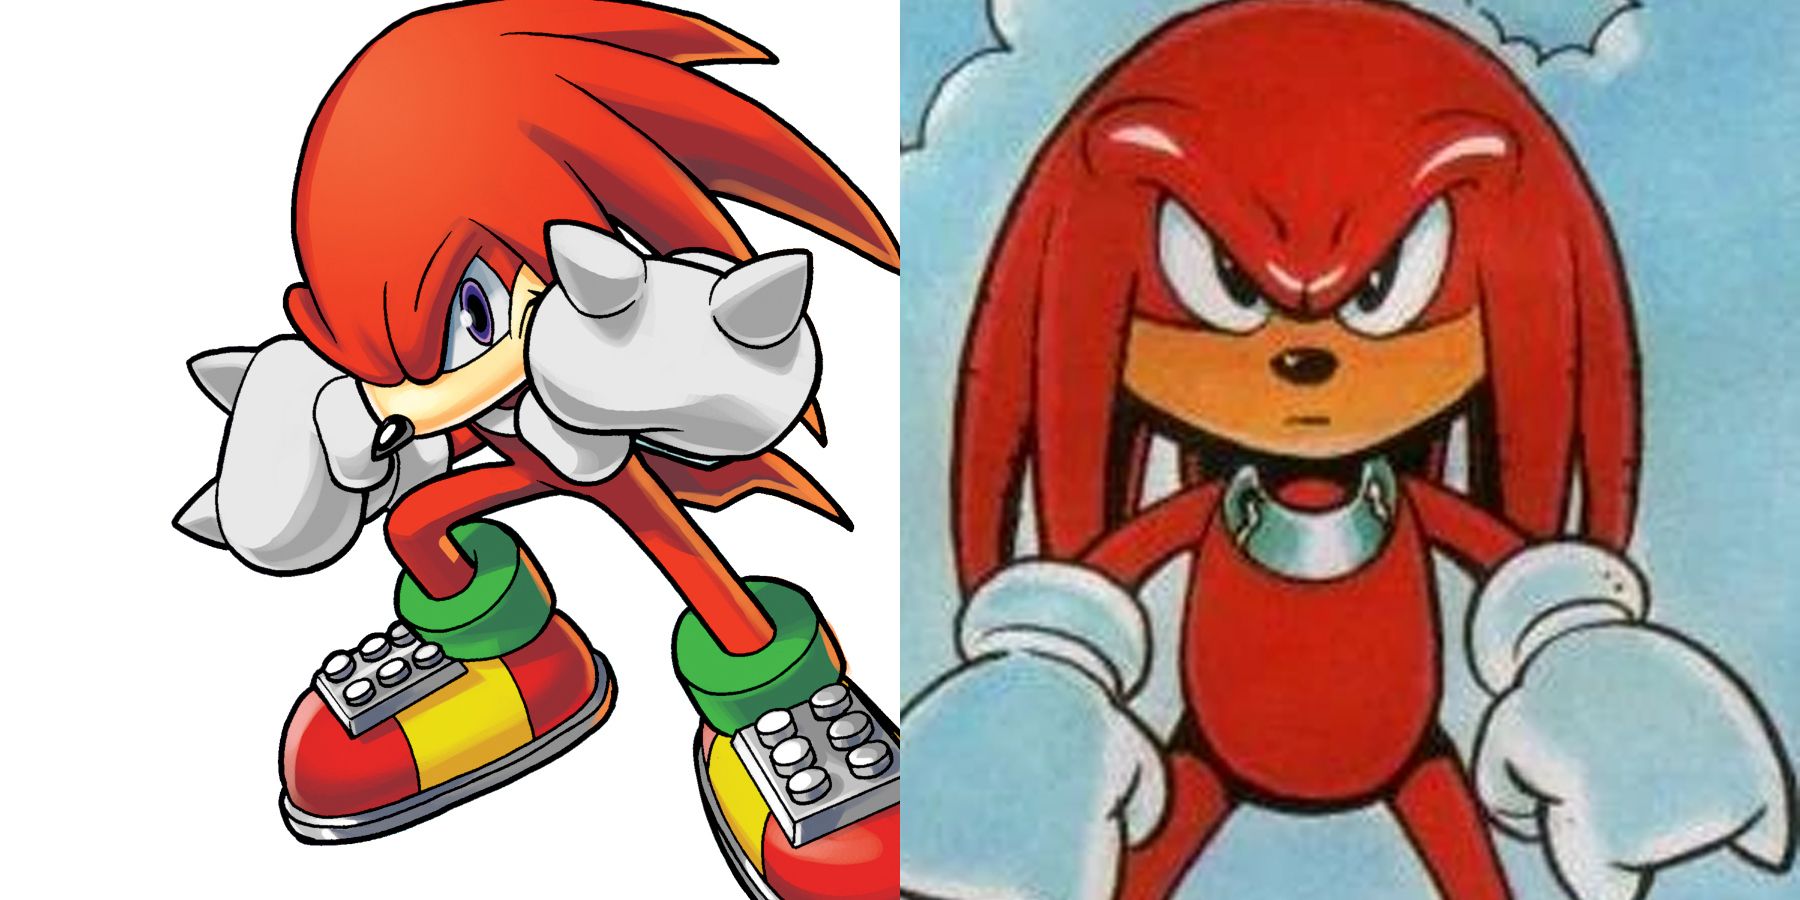 Knuckles in two different comics